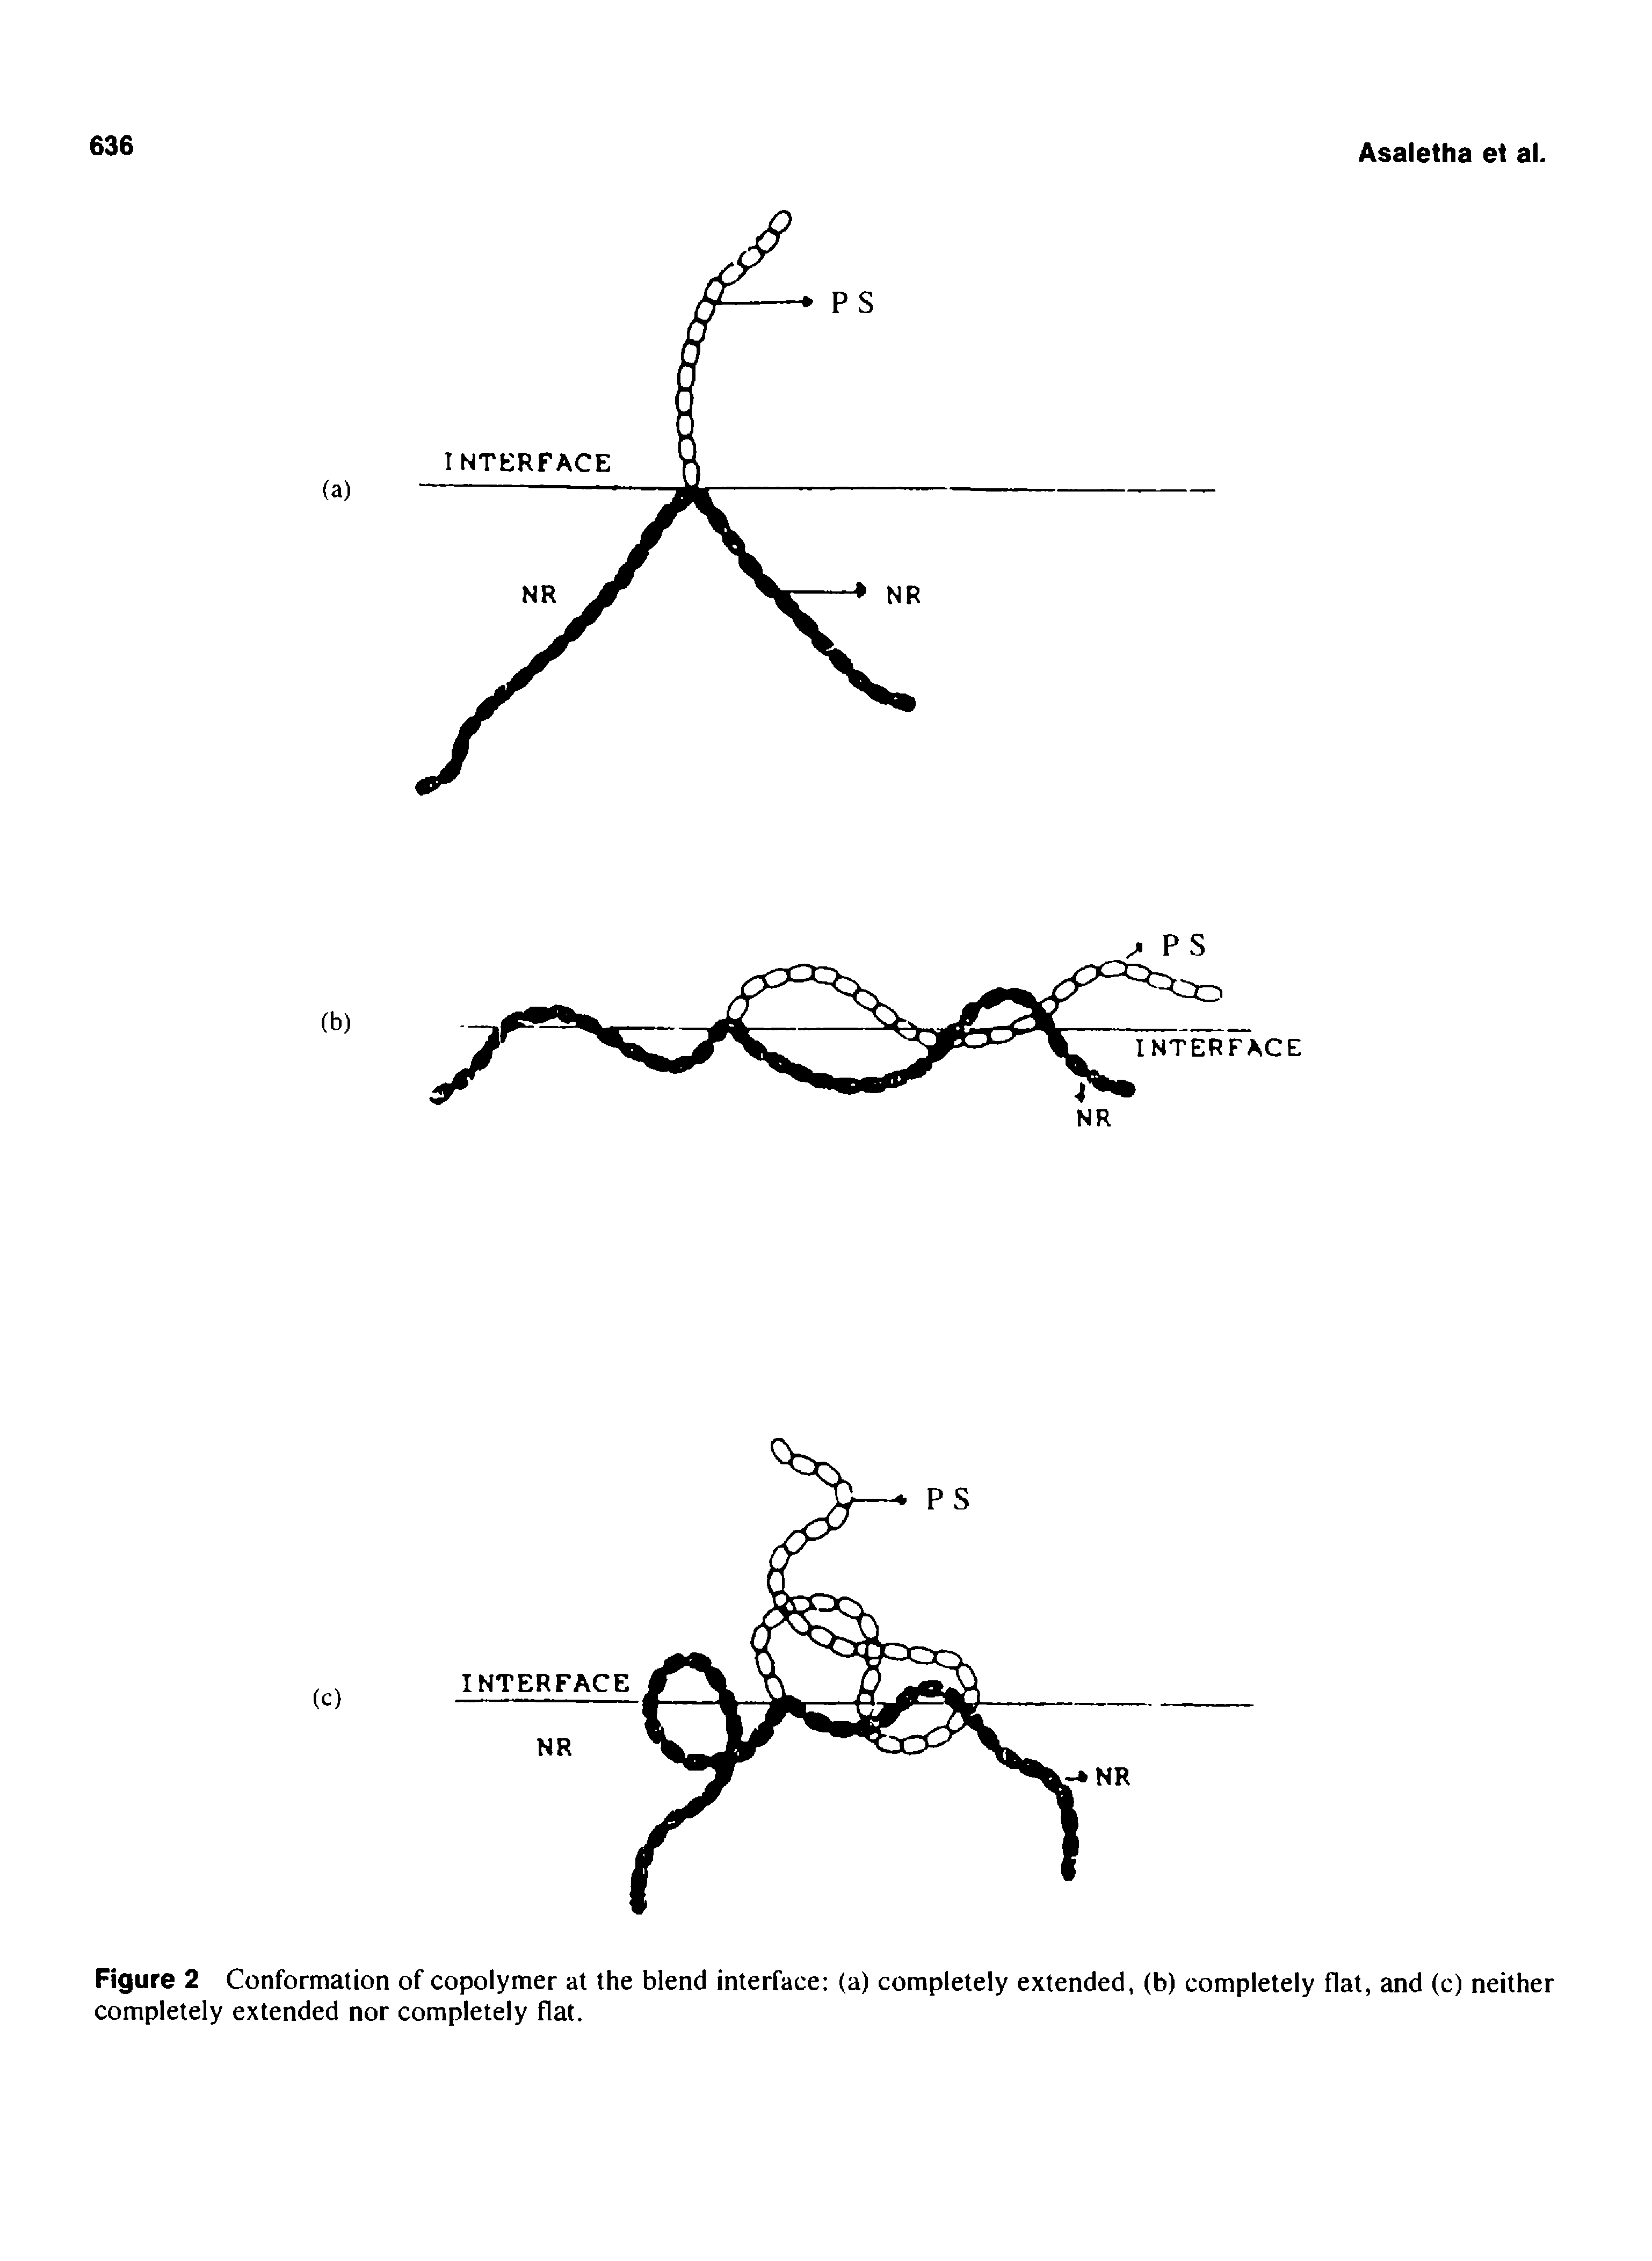 Figure 2 Conformation of copolymer at the blend interface (a) completely extended, (b) completely flat, and (c) neither completely extended nor completely flat.